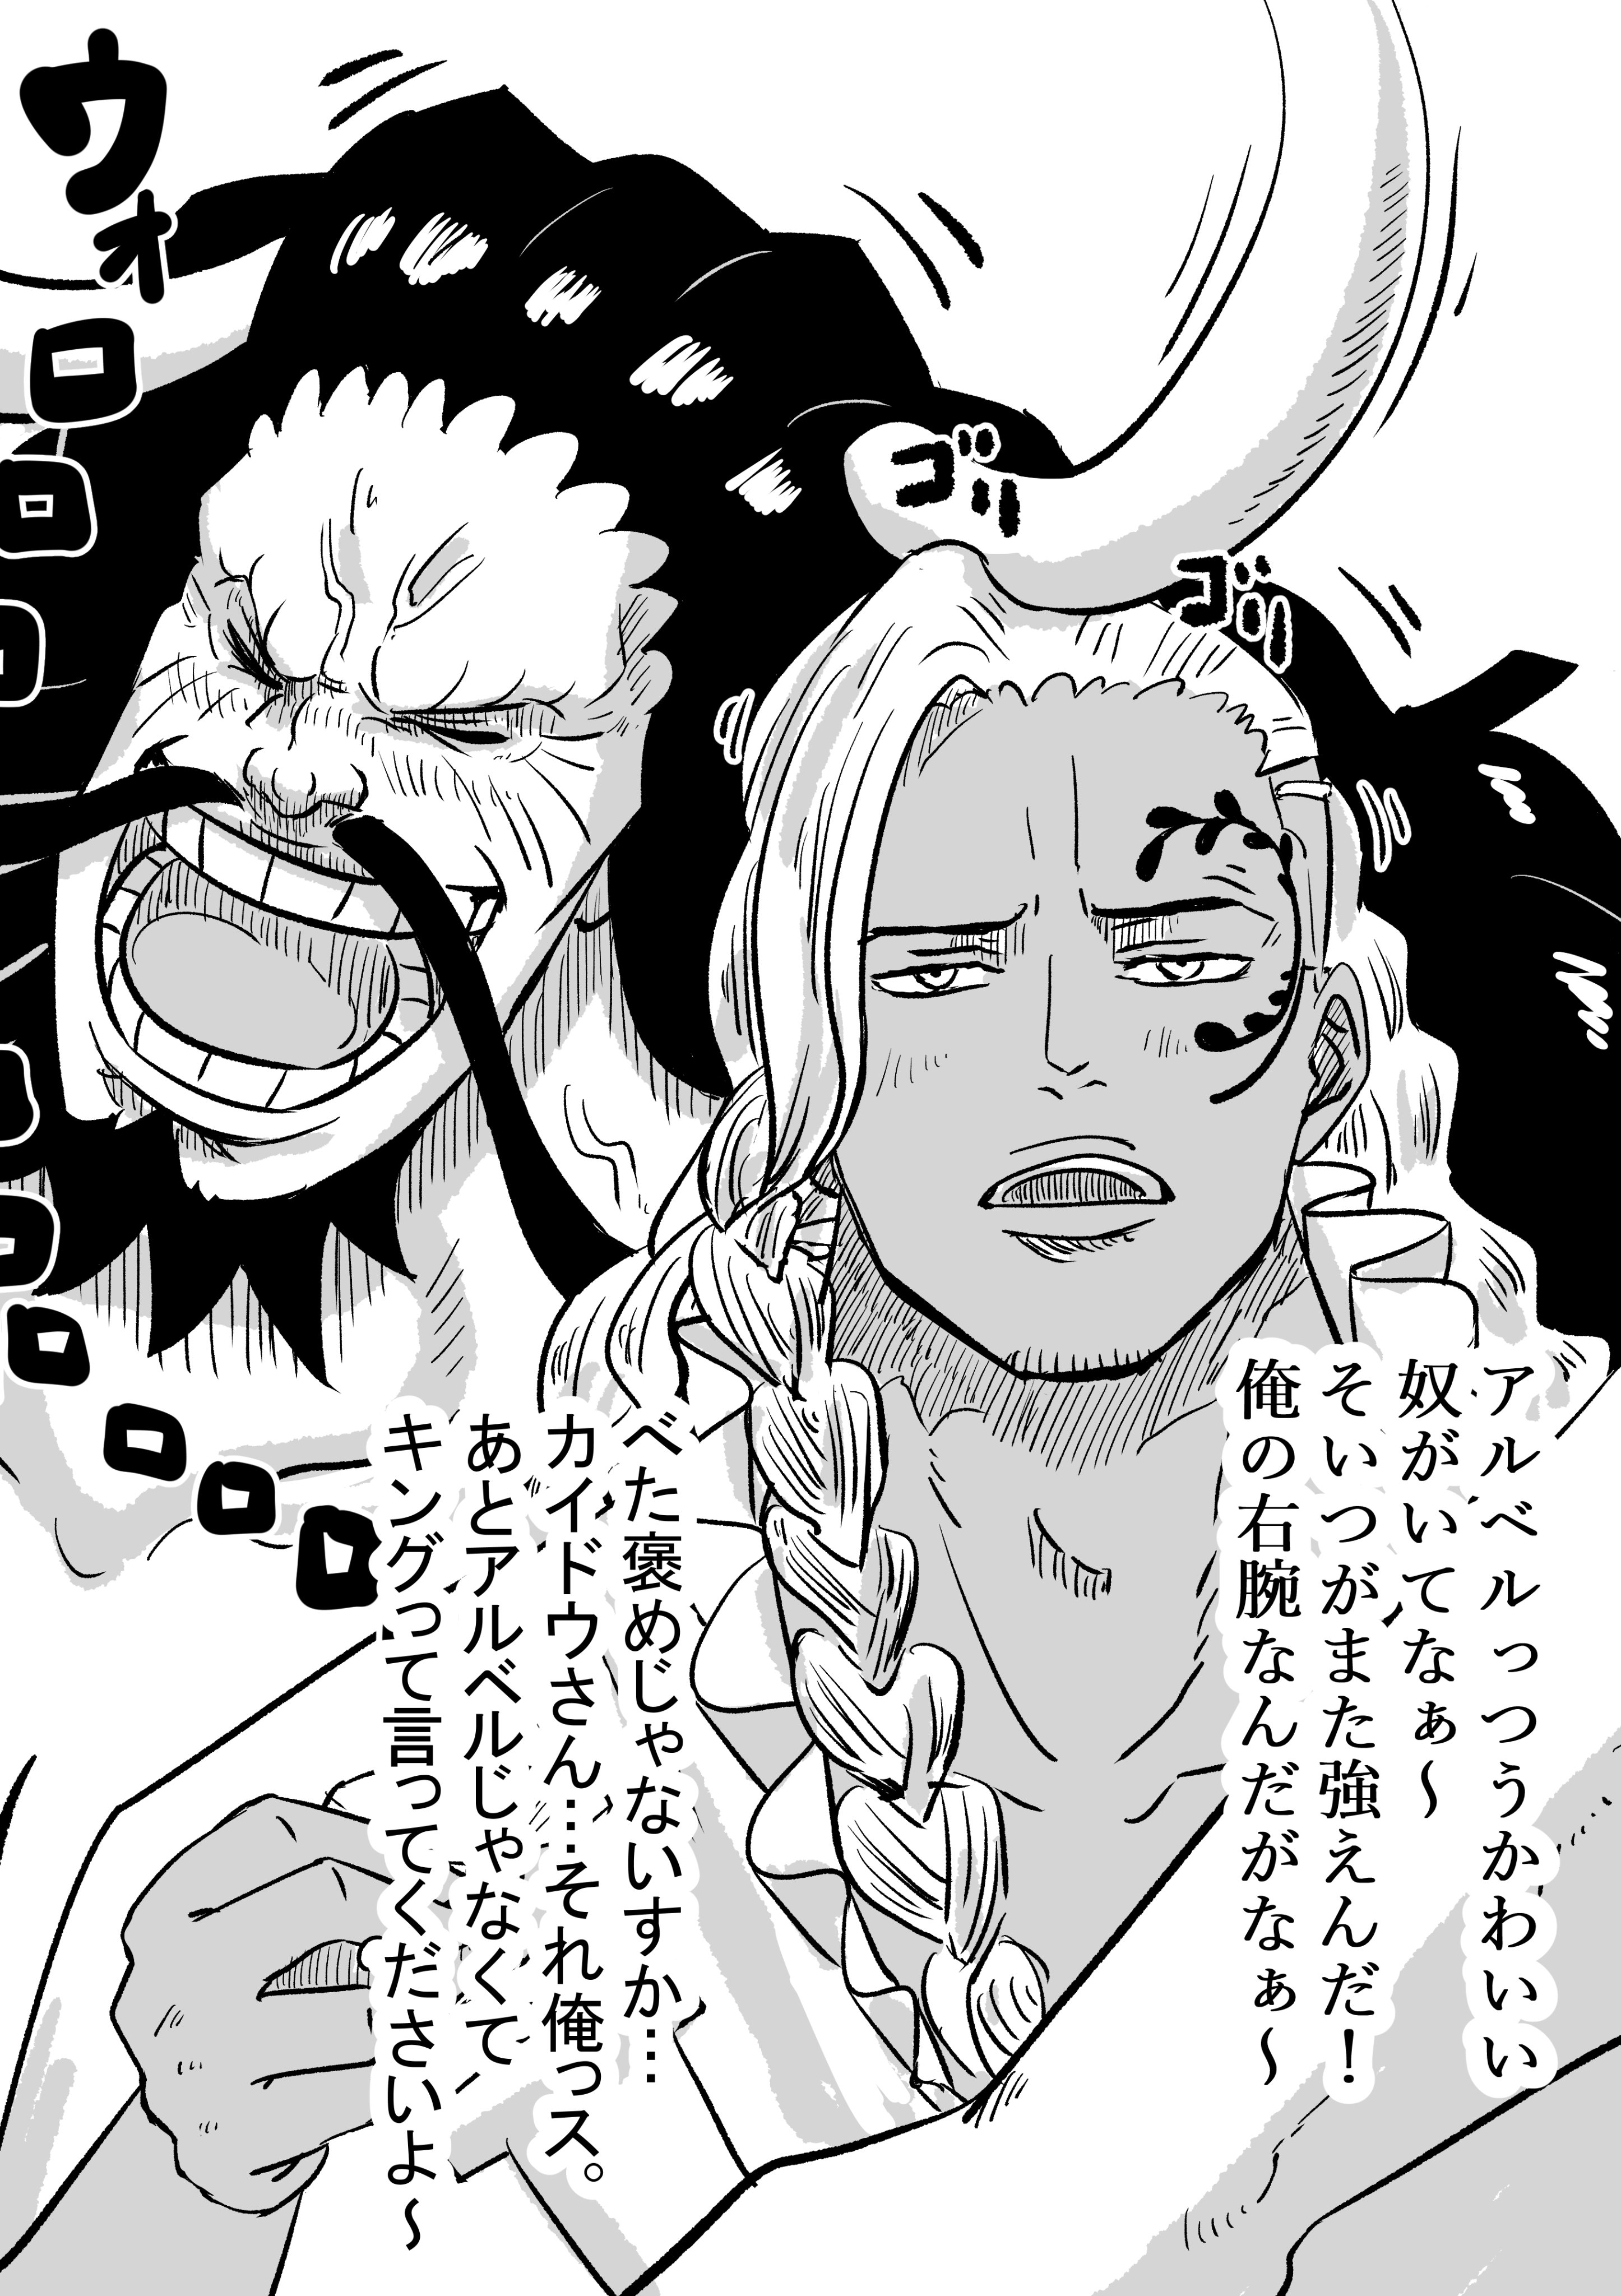 Tractrick Onepieceキングとカイドウさんの飲み絡み T Co Zumlttons9 Twitter